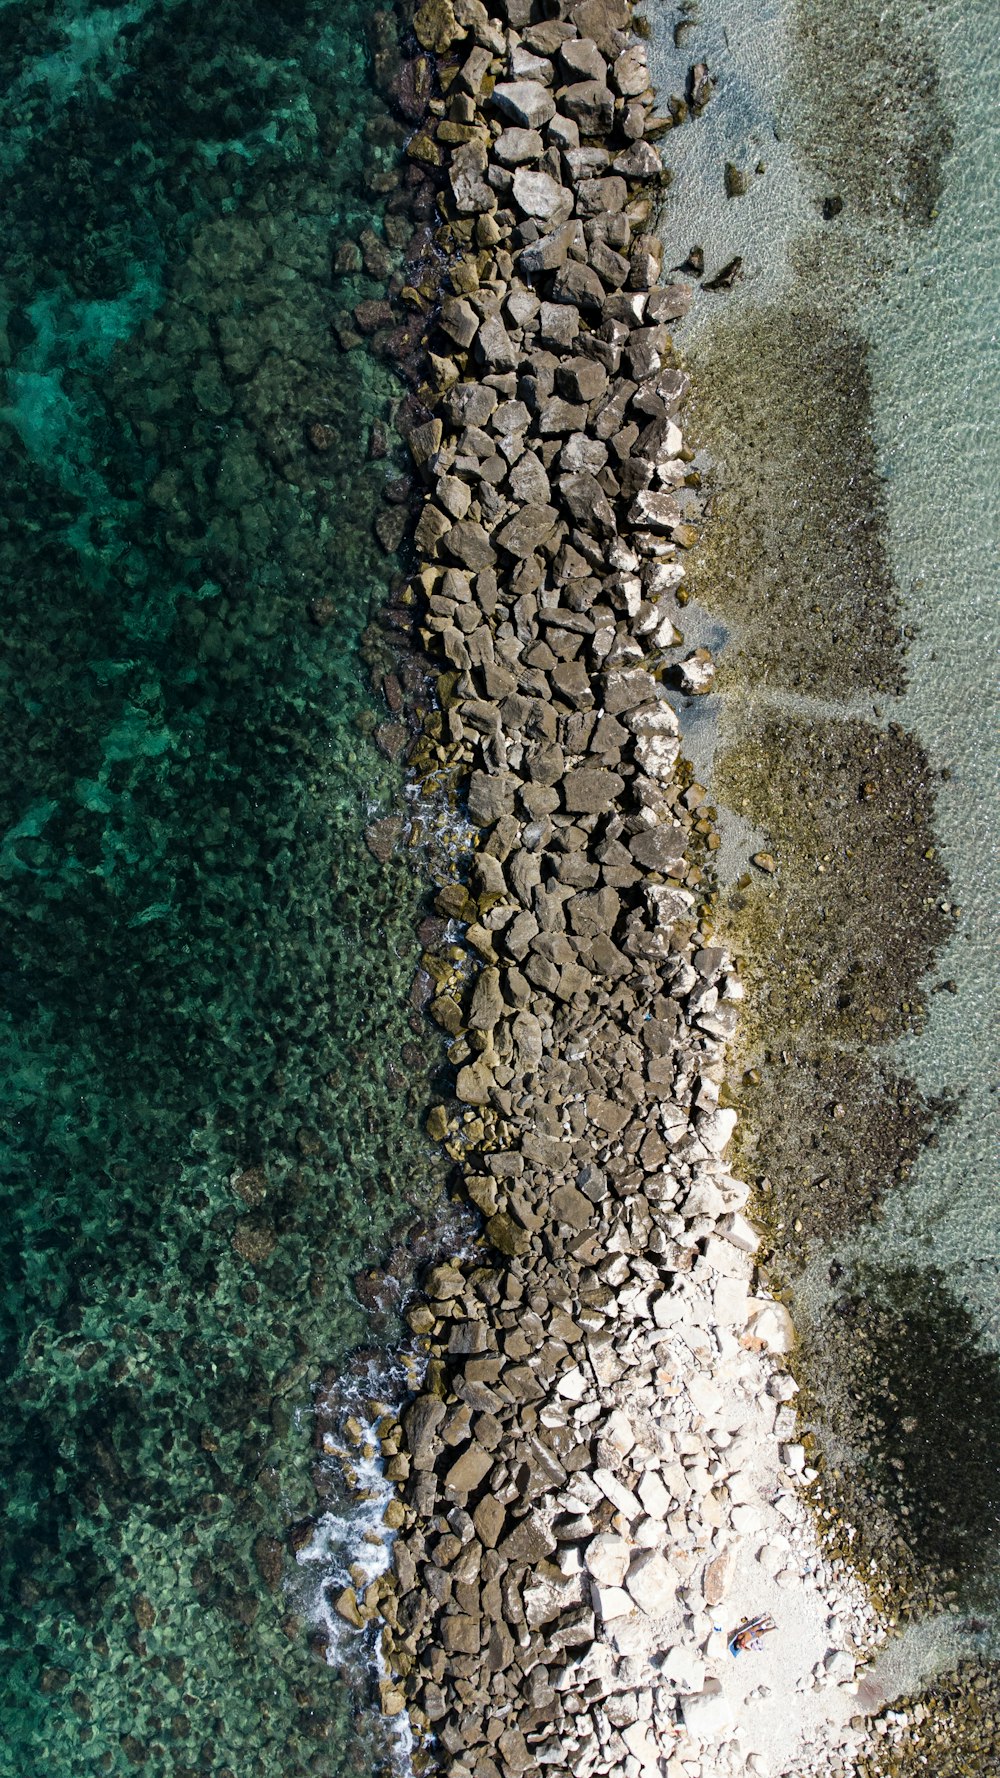 a bird's eye view of the water and rocks